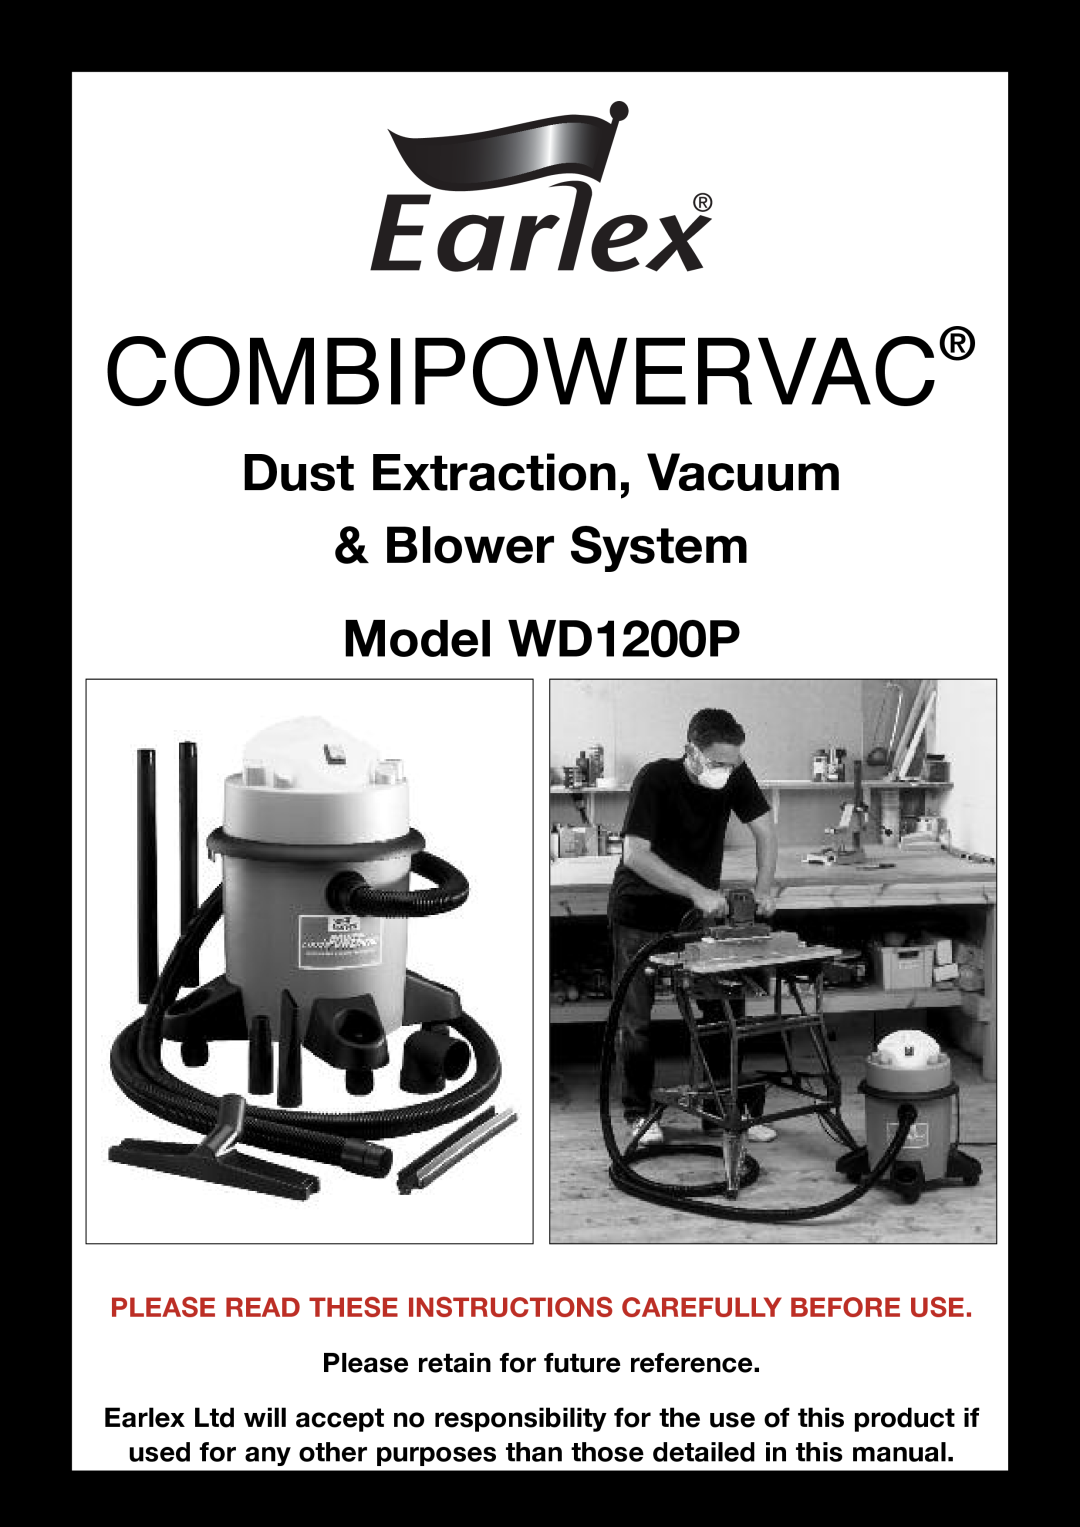 Earlex manual Combipowervac, Dust Extraction, Vacuum, Blower System Model WD1200P, Please retain for future reference 